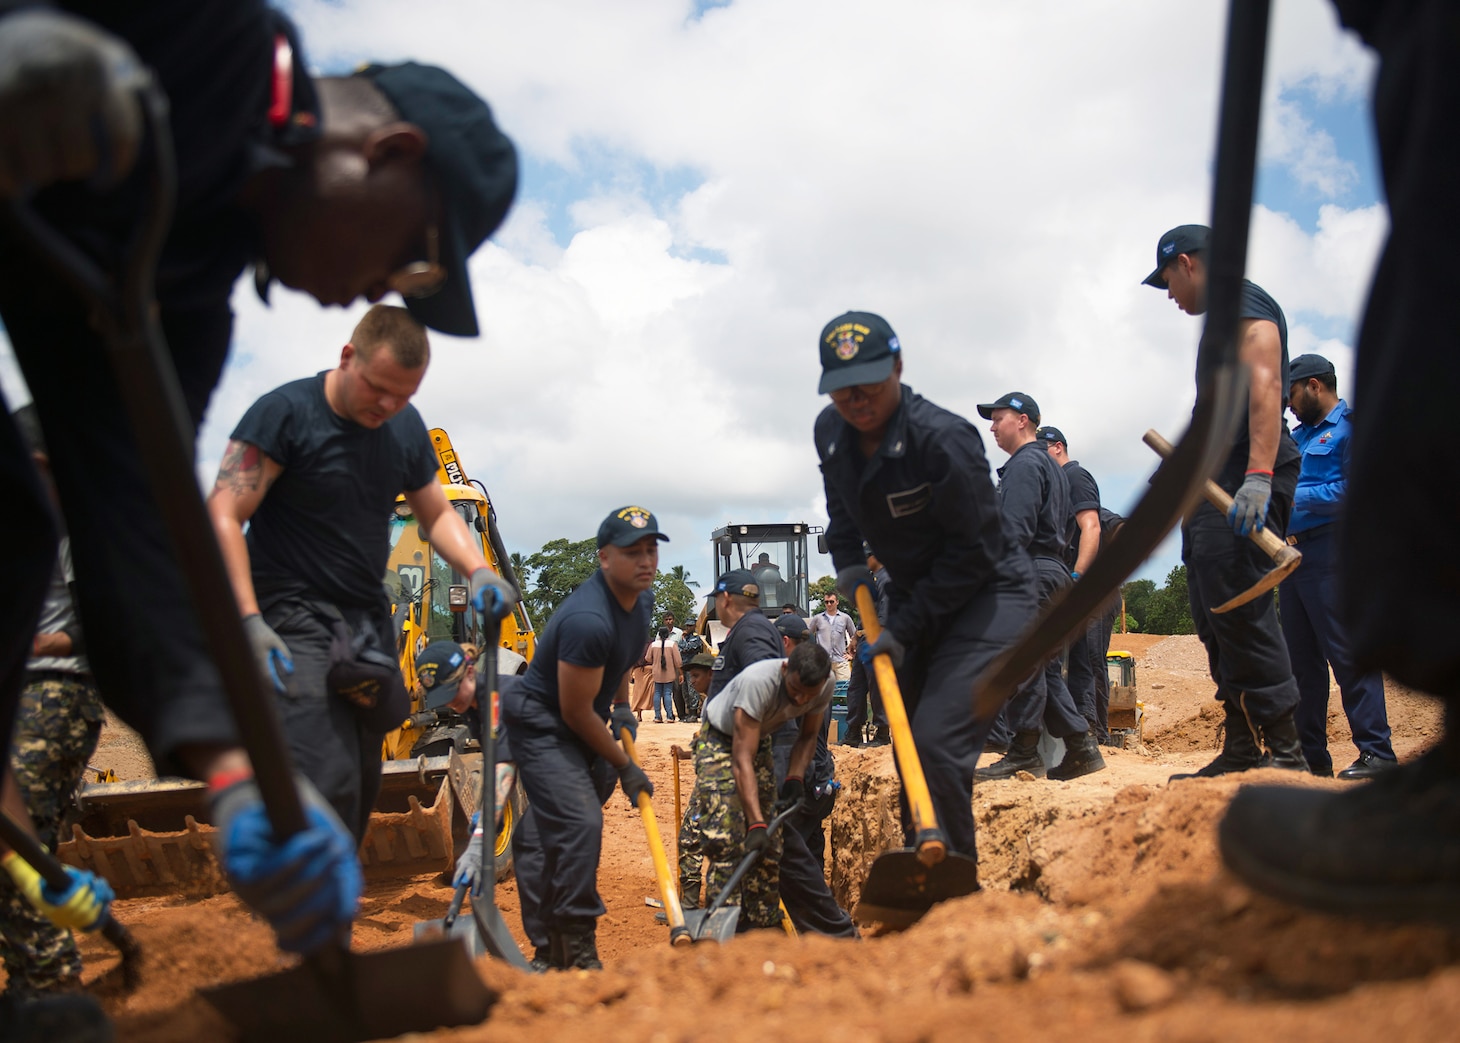 Sailors assigned to the Ticonderoga-class guided missile cruiser USS Lake Erie (CG 70) and the Sri Lankan marines rebuild a levee during support humanitarian assistance operations in response to severe flooding and landslides that devastated many regions of the country, June 13, 2017. 